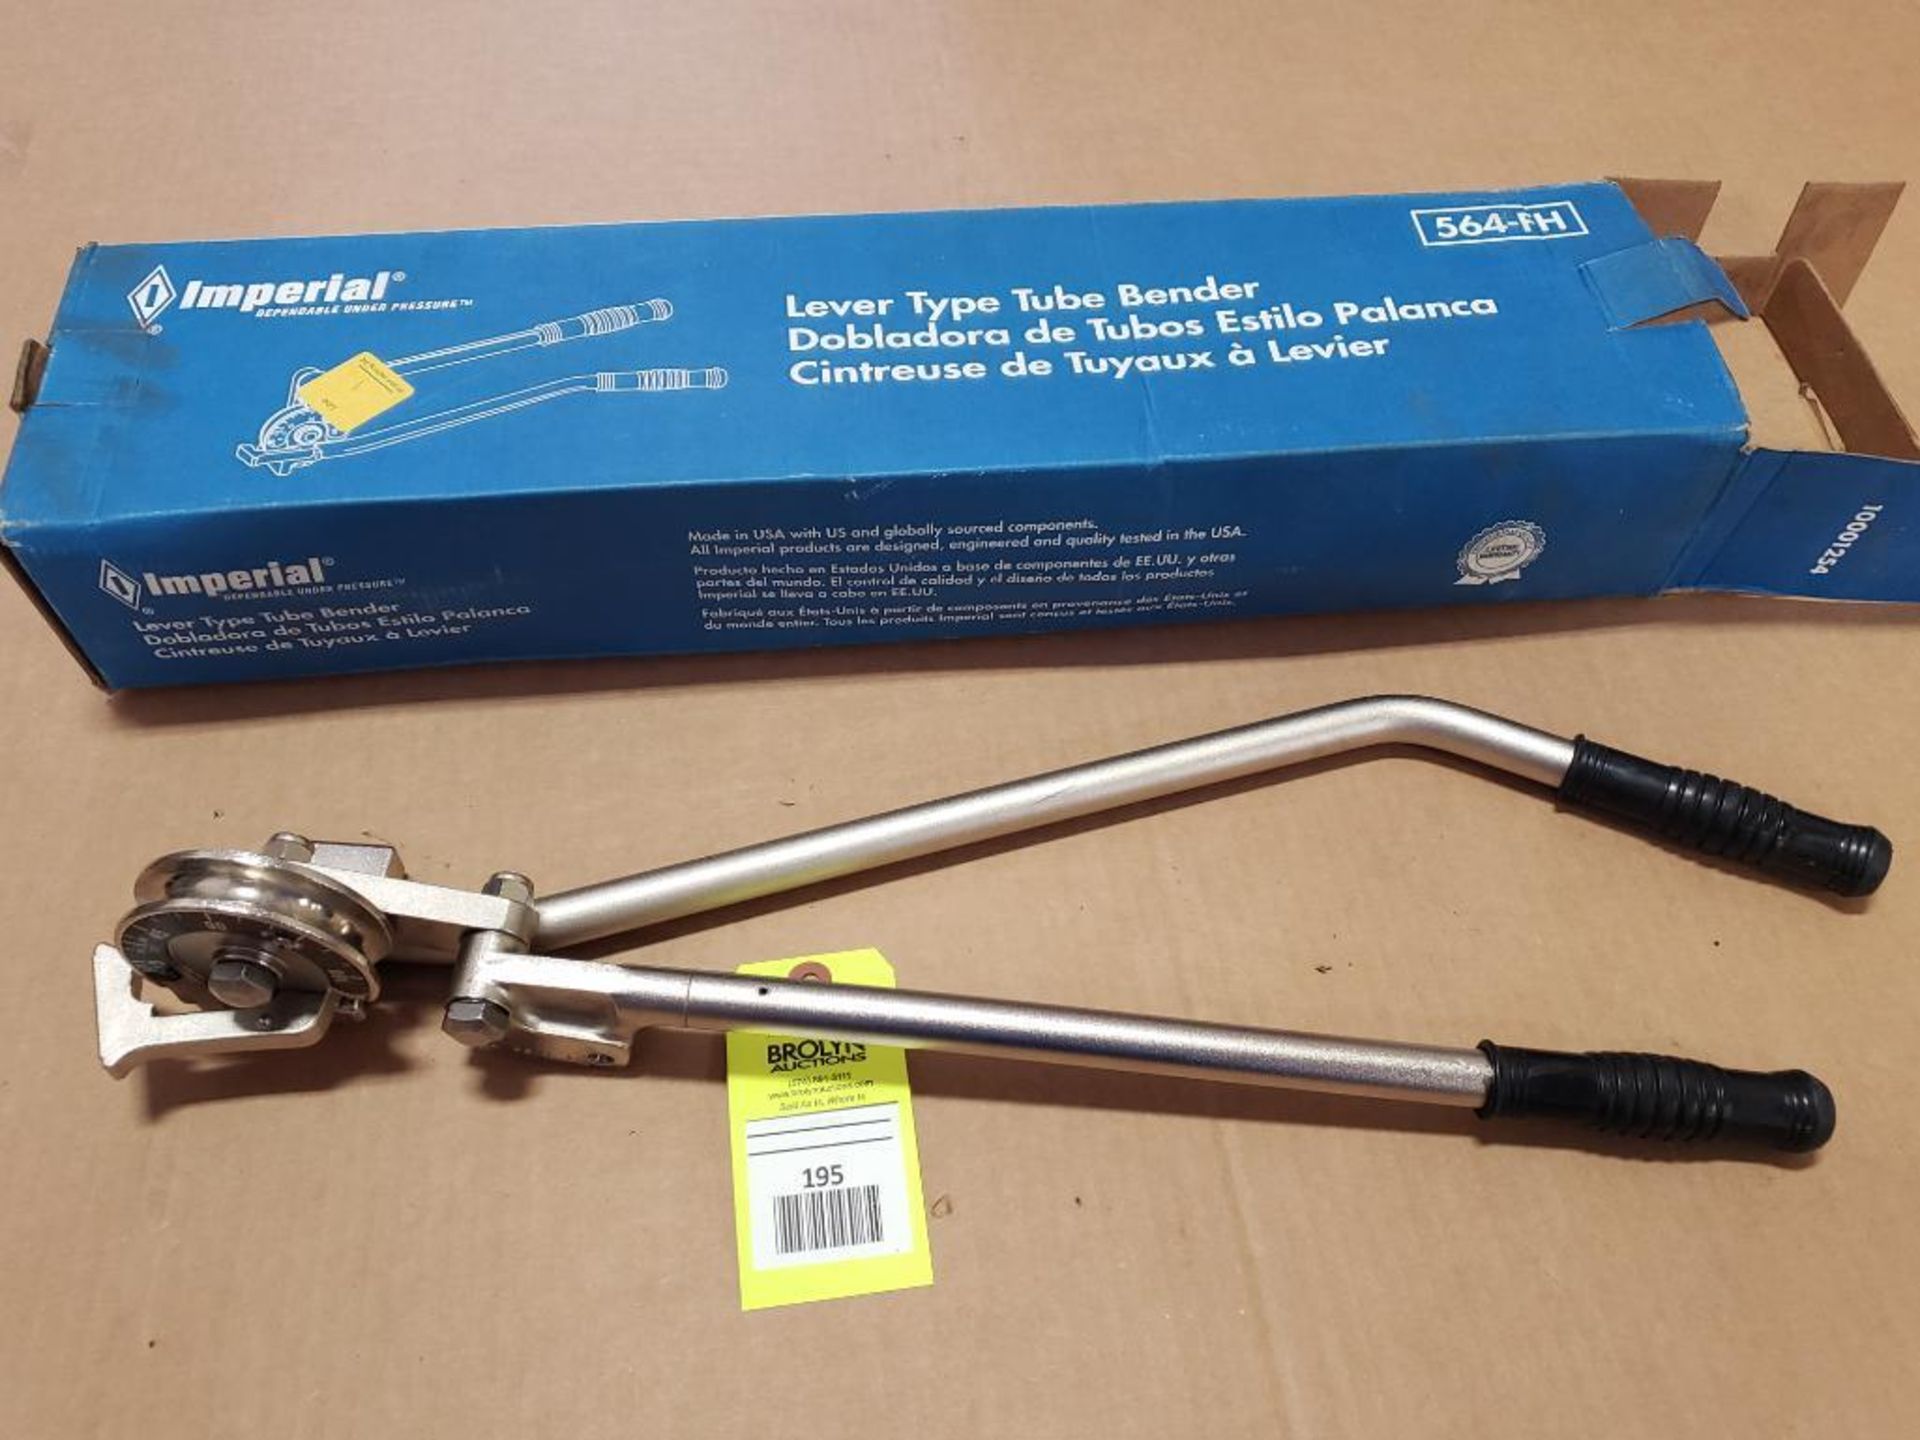 Imperial 564-FH Lever type tube bender. New in box.